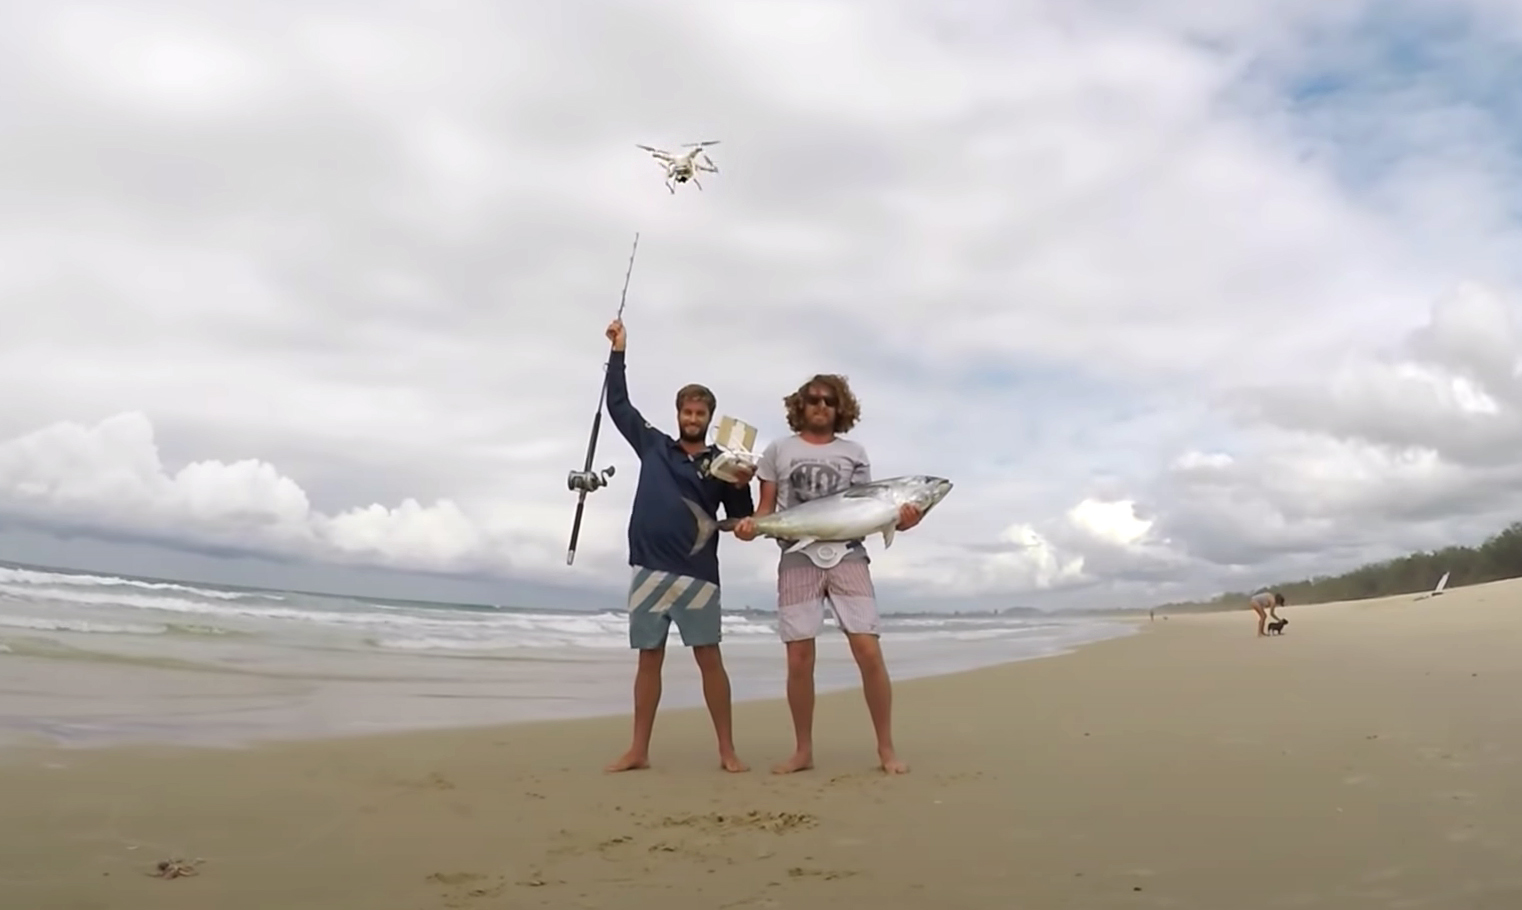 Two fishermen on the beach, one holding a rod, the other a fish, with a drone above them.